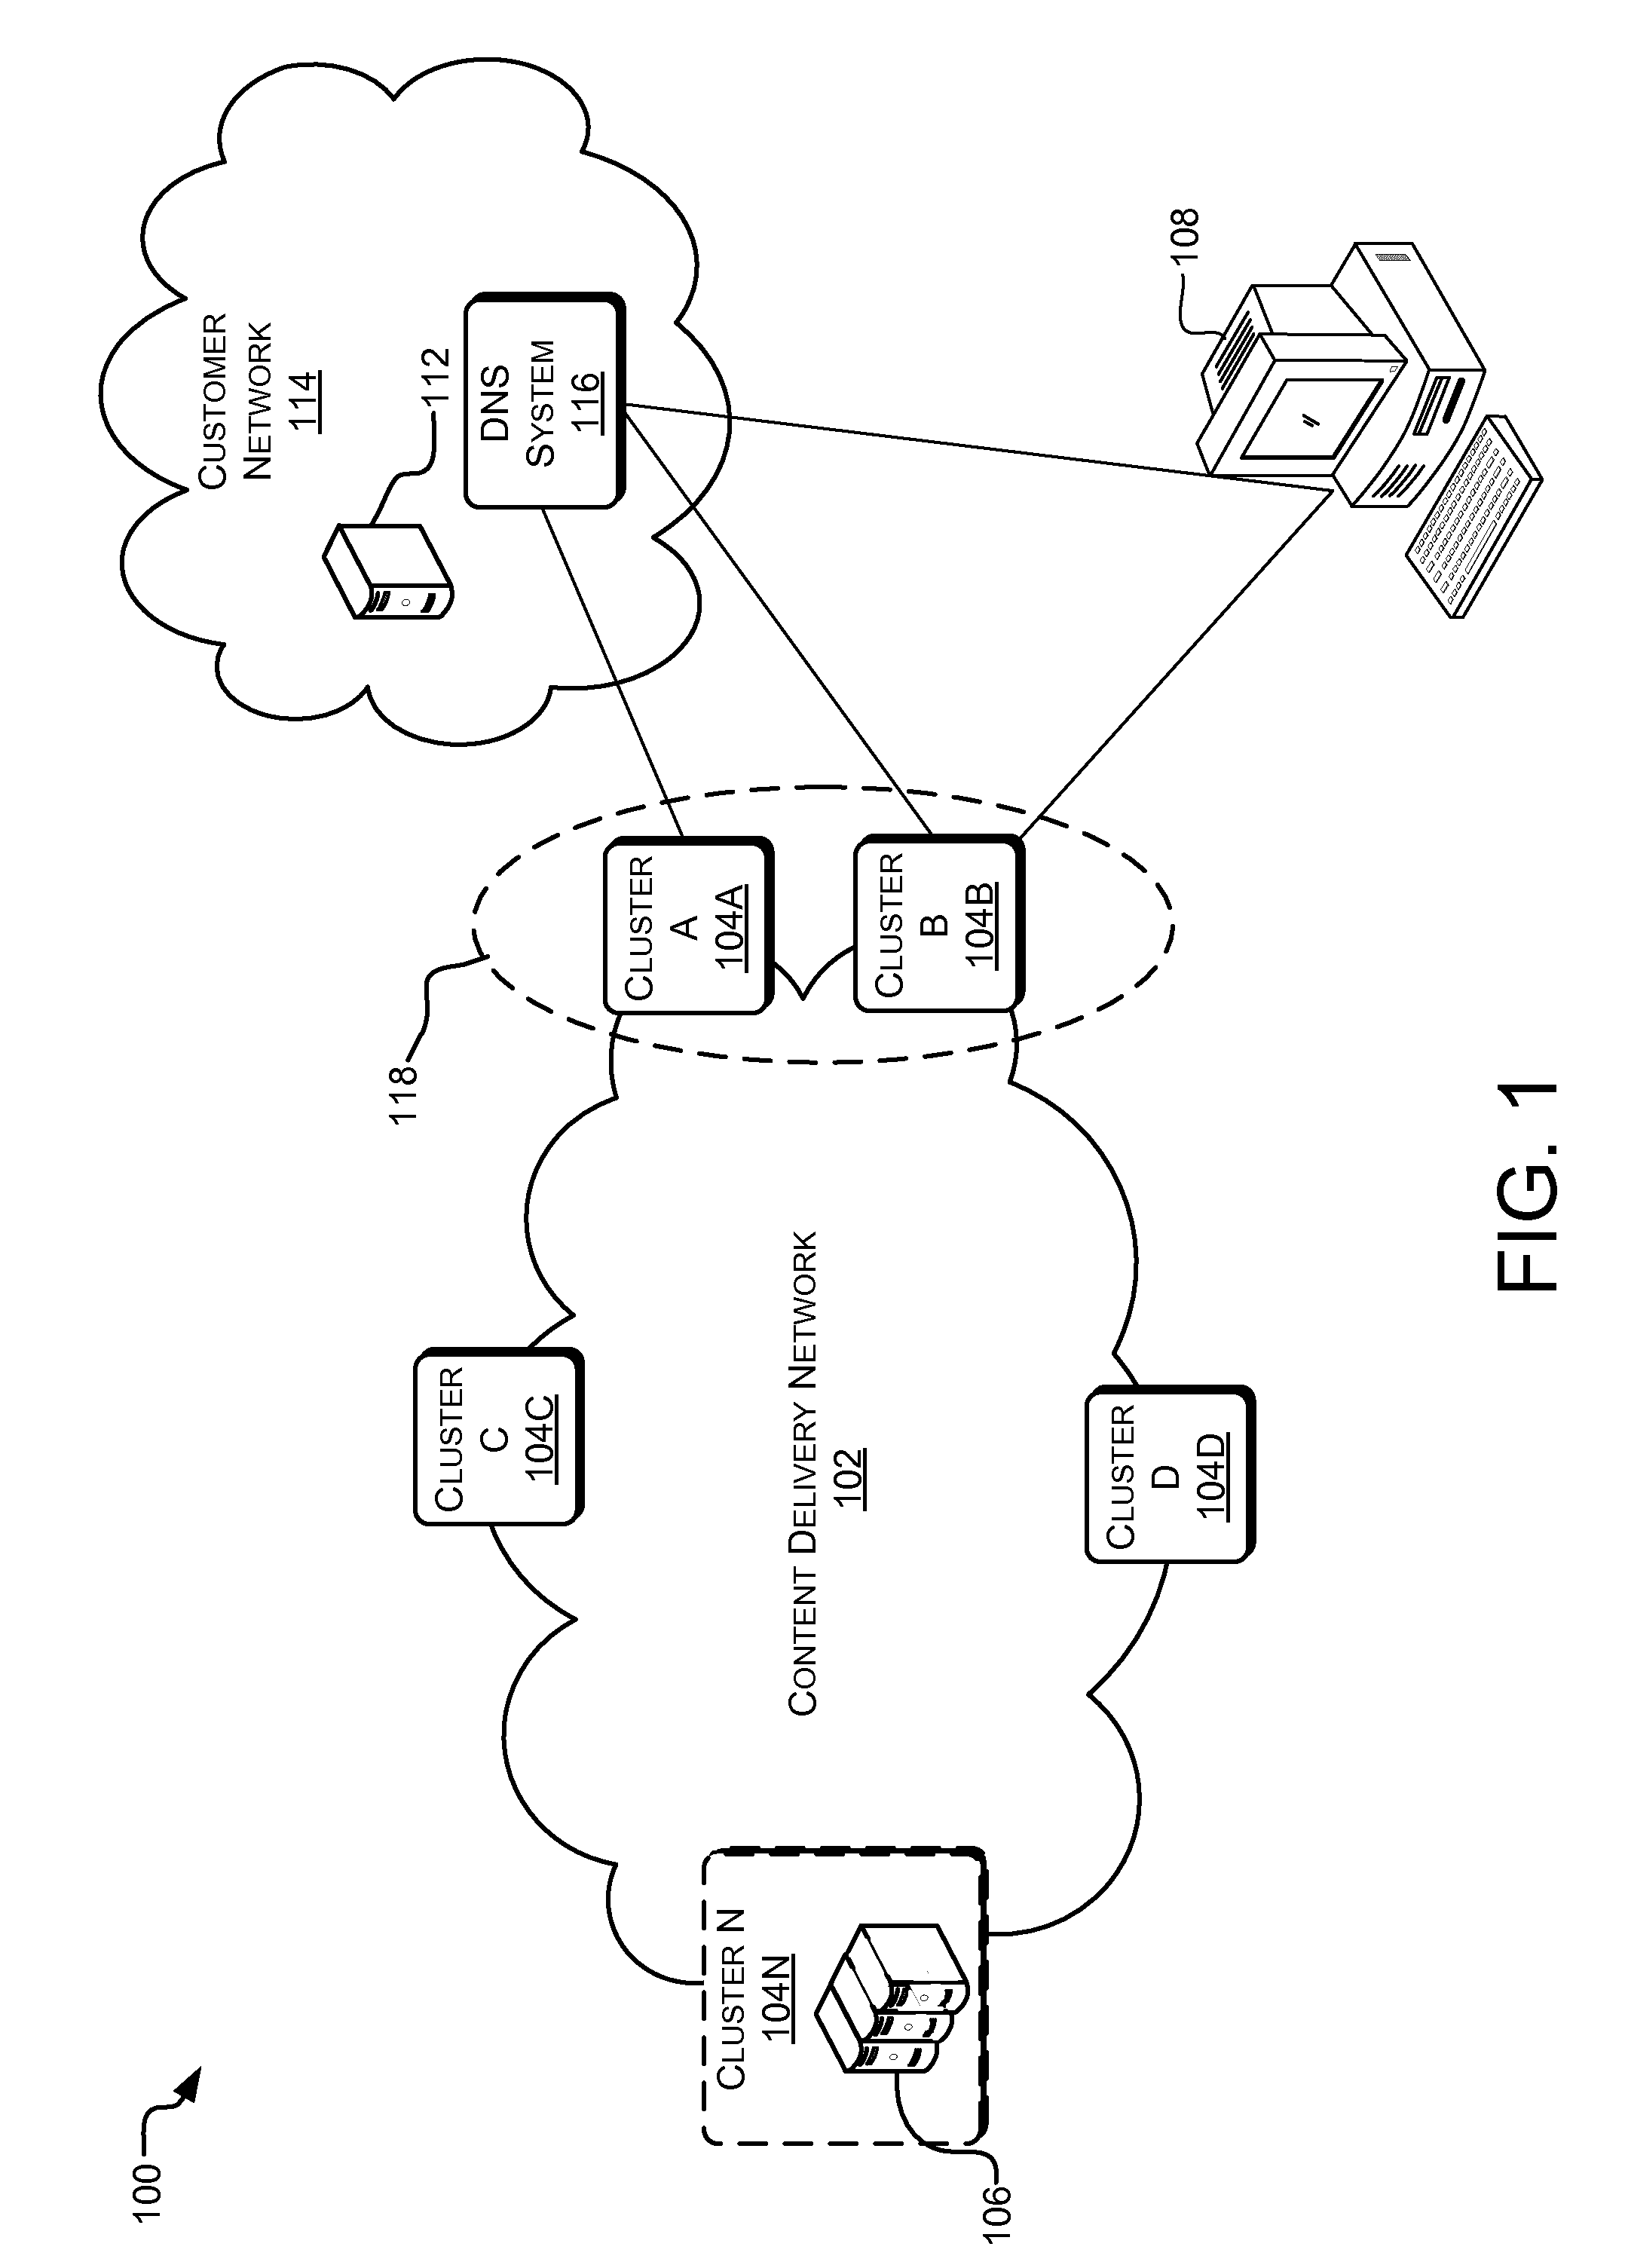 Dynamic binding for use in content distribution